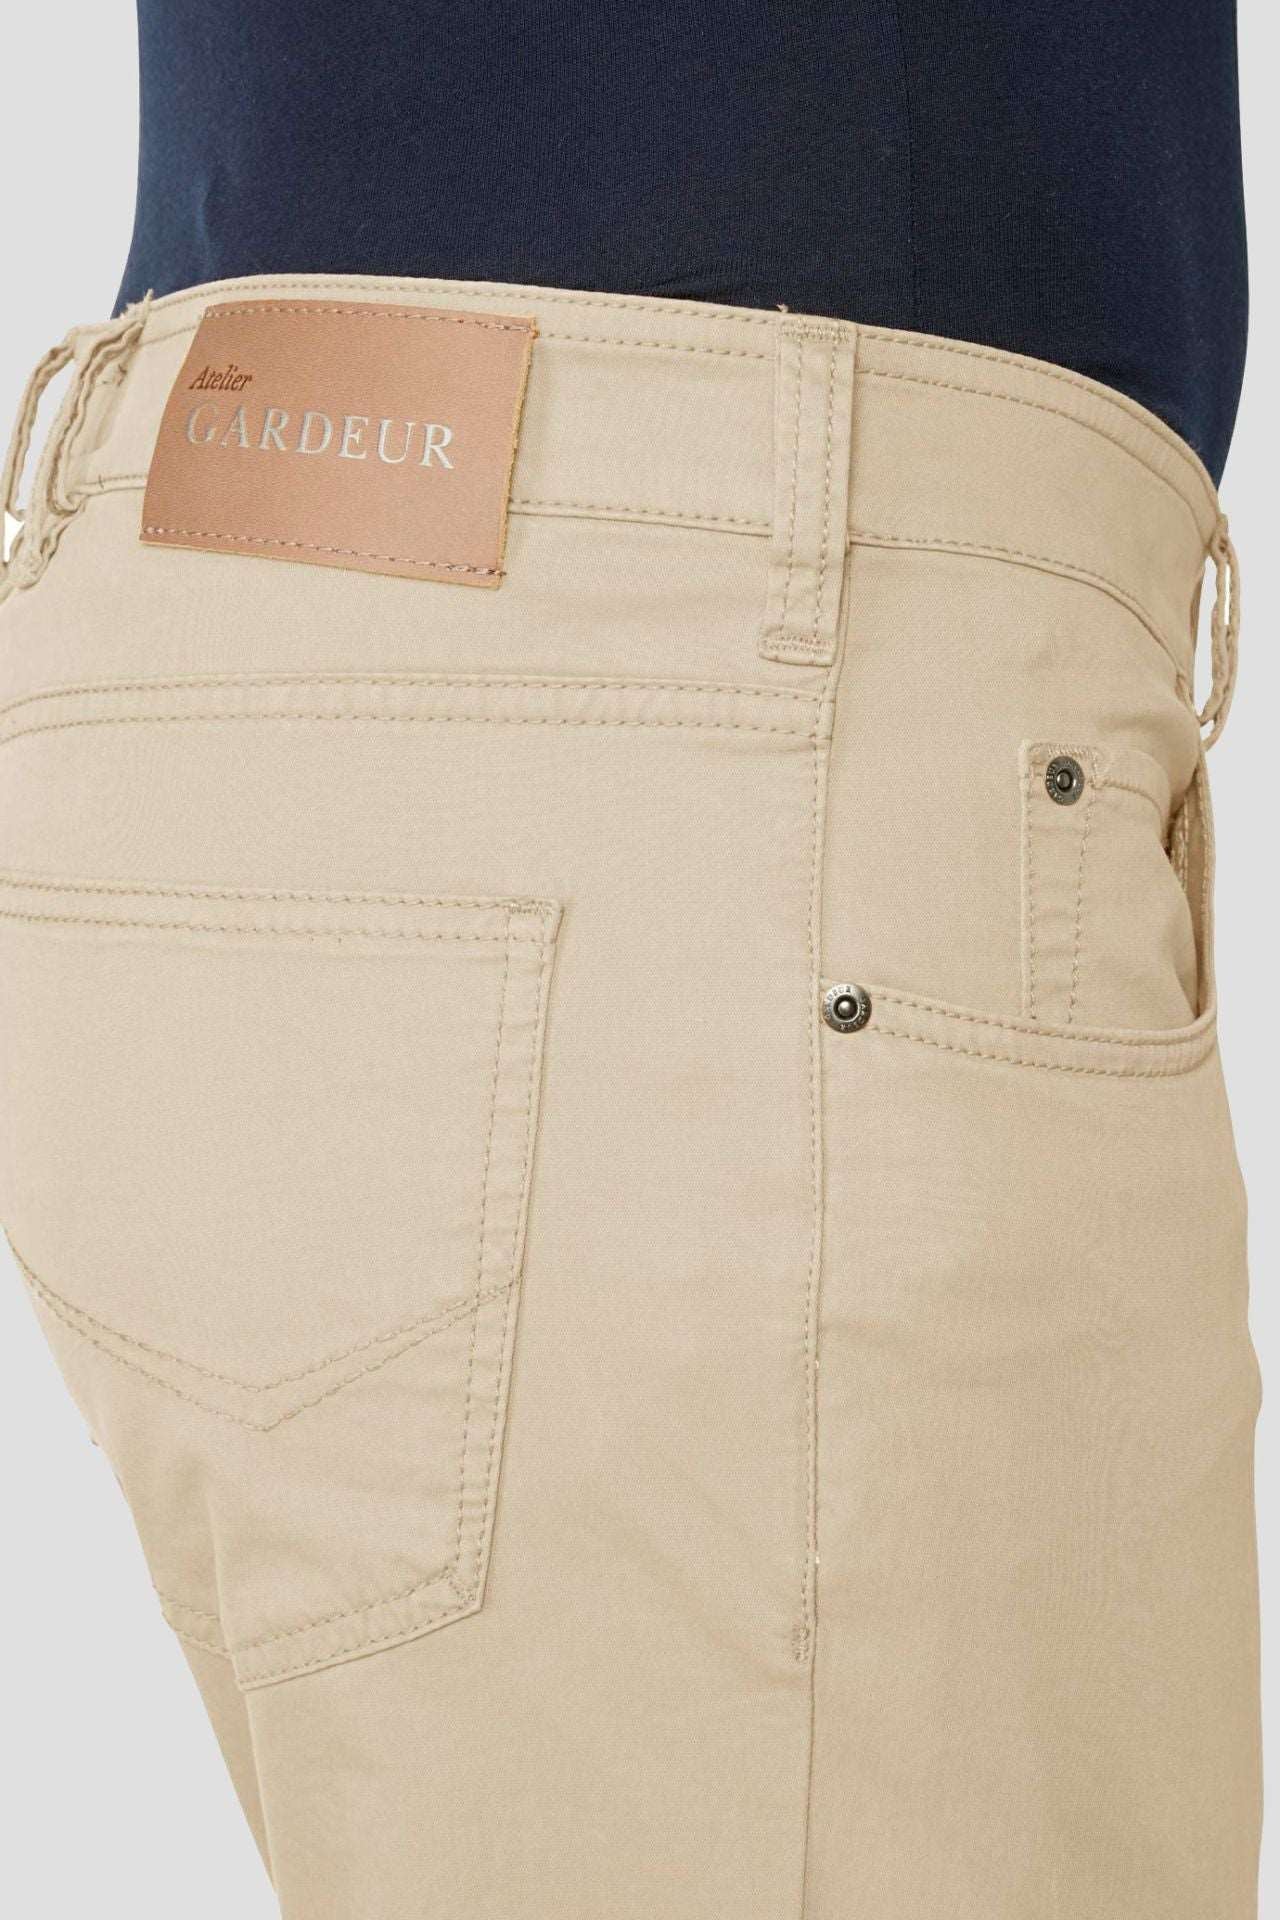 a model wearing Garduer Cotton Flex Trousers Beige cropped to show the right front and rear pocket with the Gardeur badge 